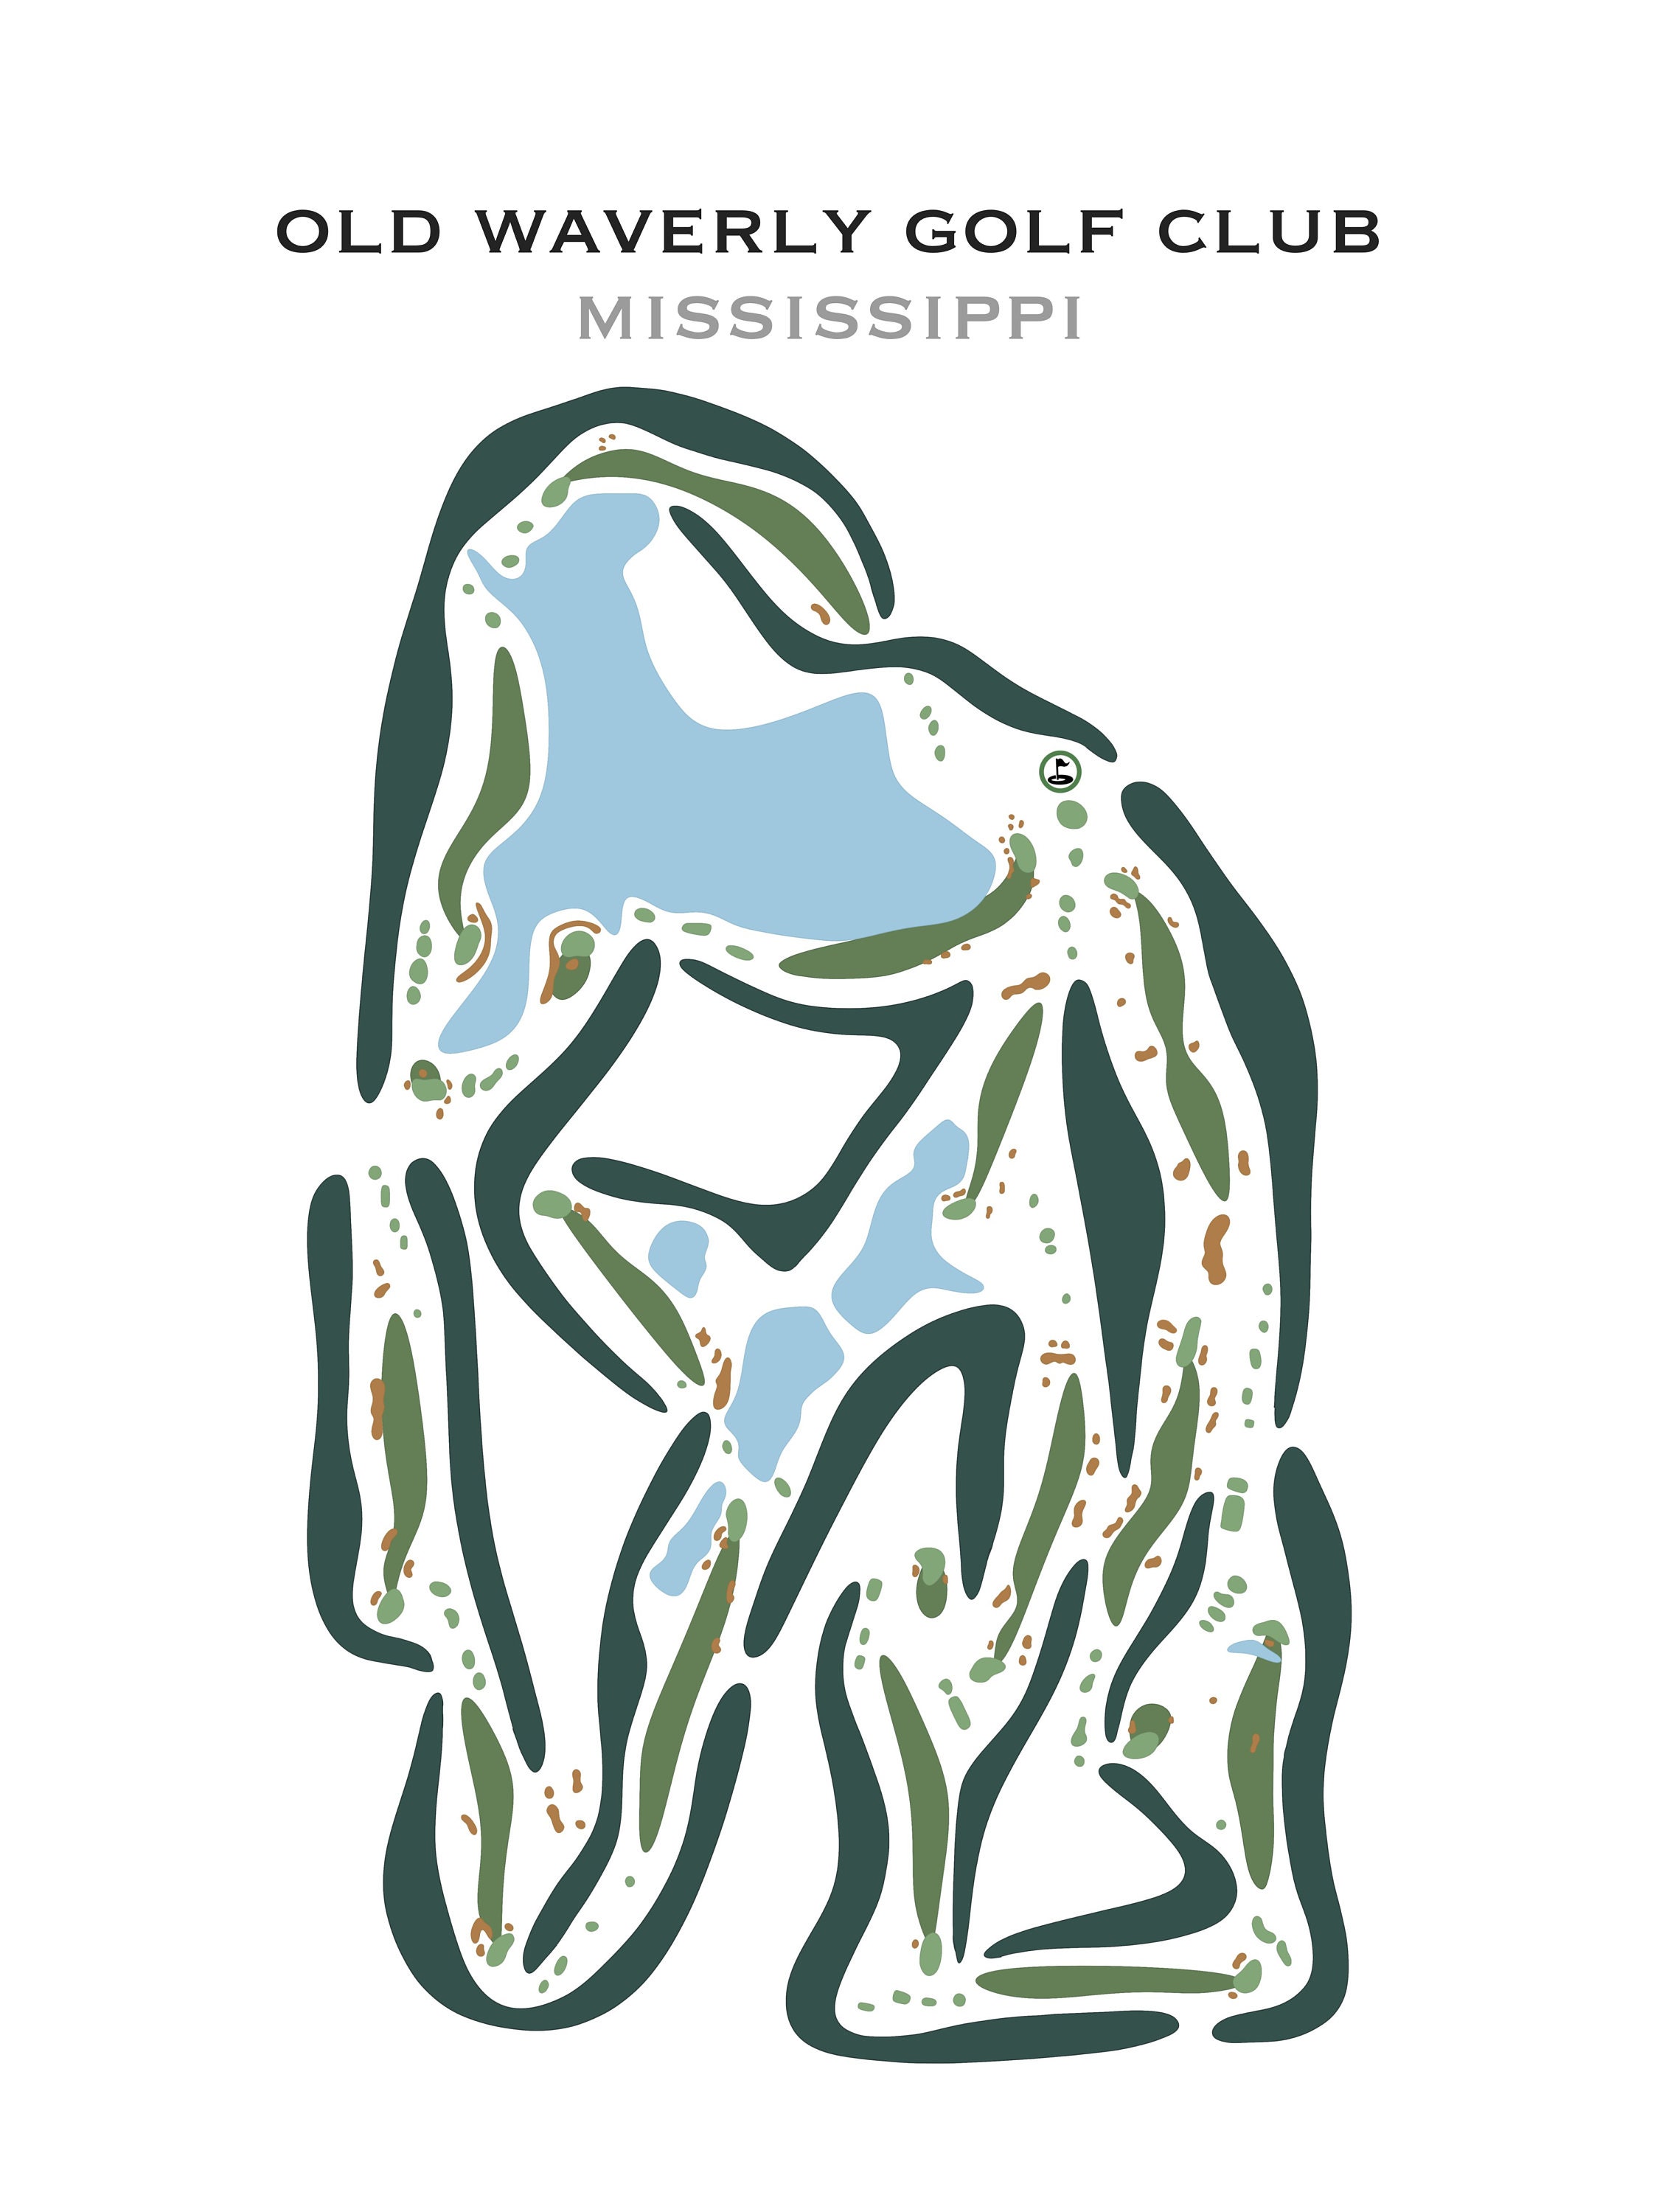 Old Waverly Golf Club Mississippi Golf Course Map Golf image pic